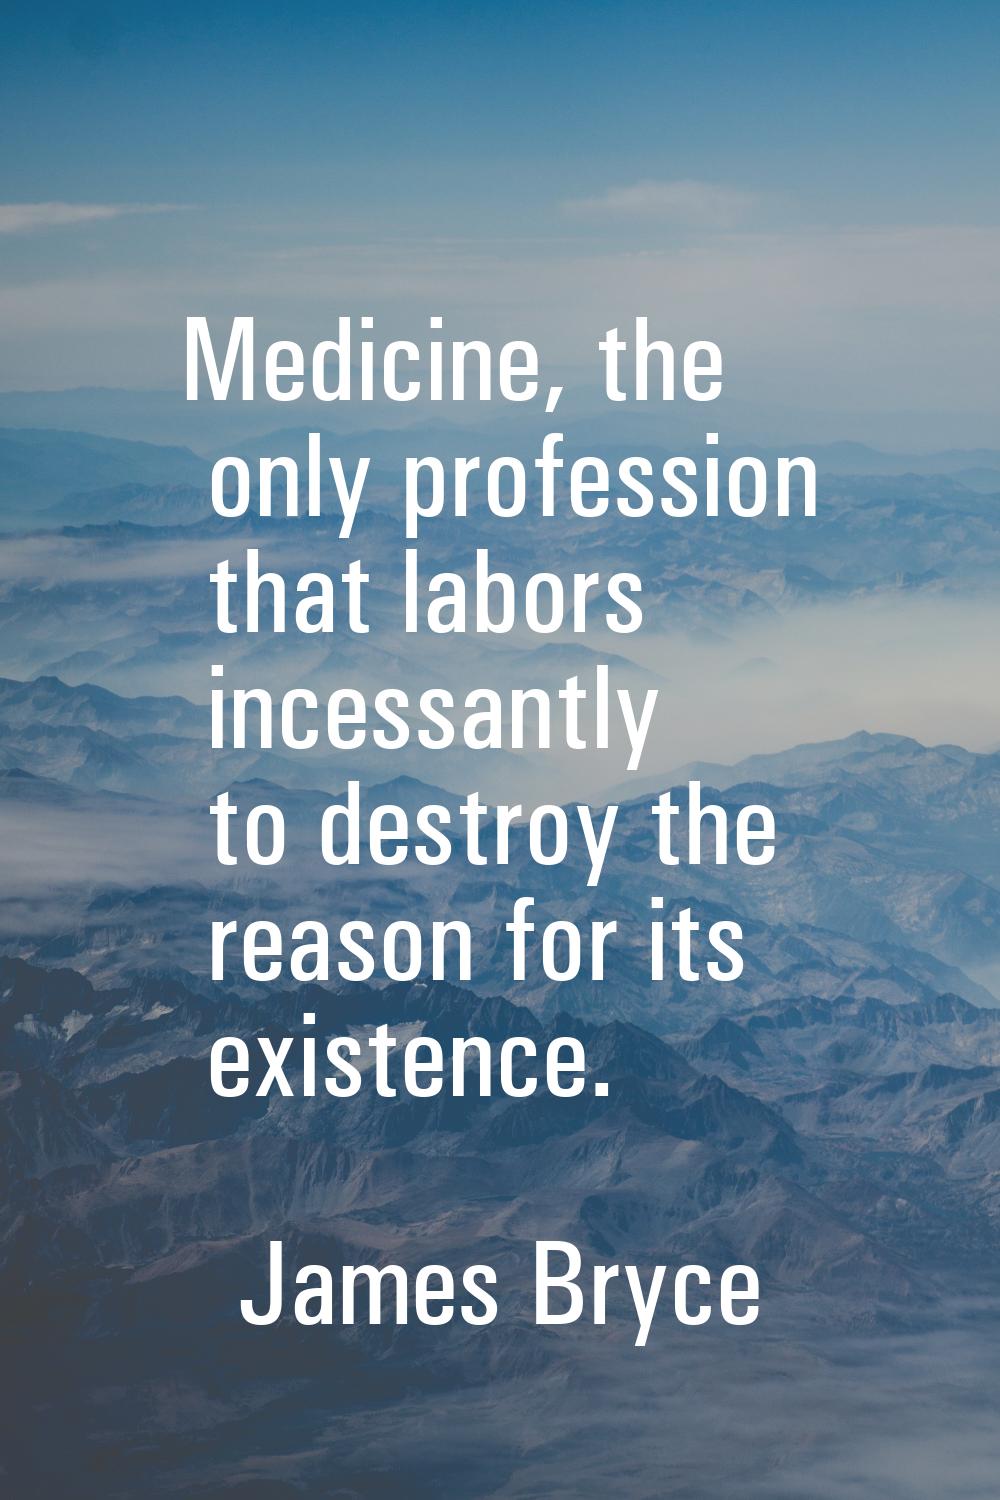 Medicine, the only profession that labors incessantly to destroy the reason for its existence.